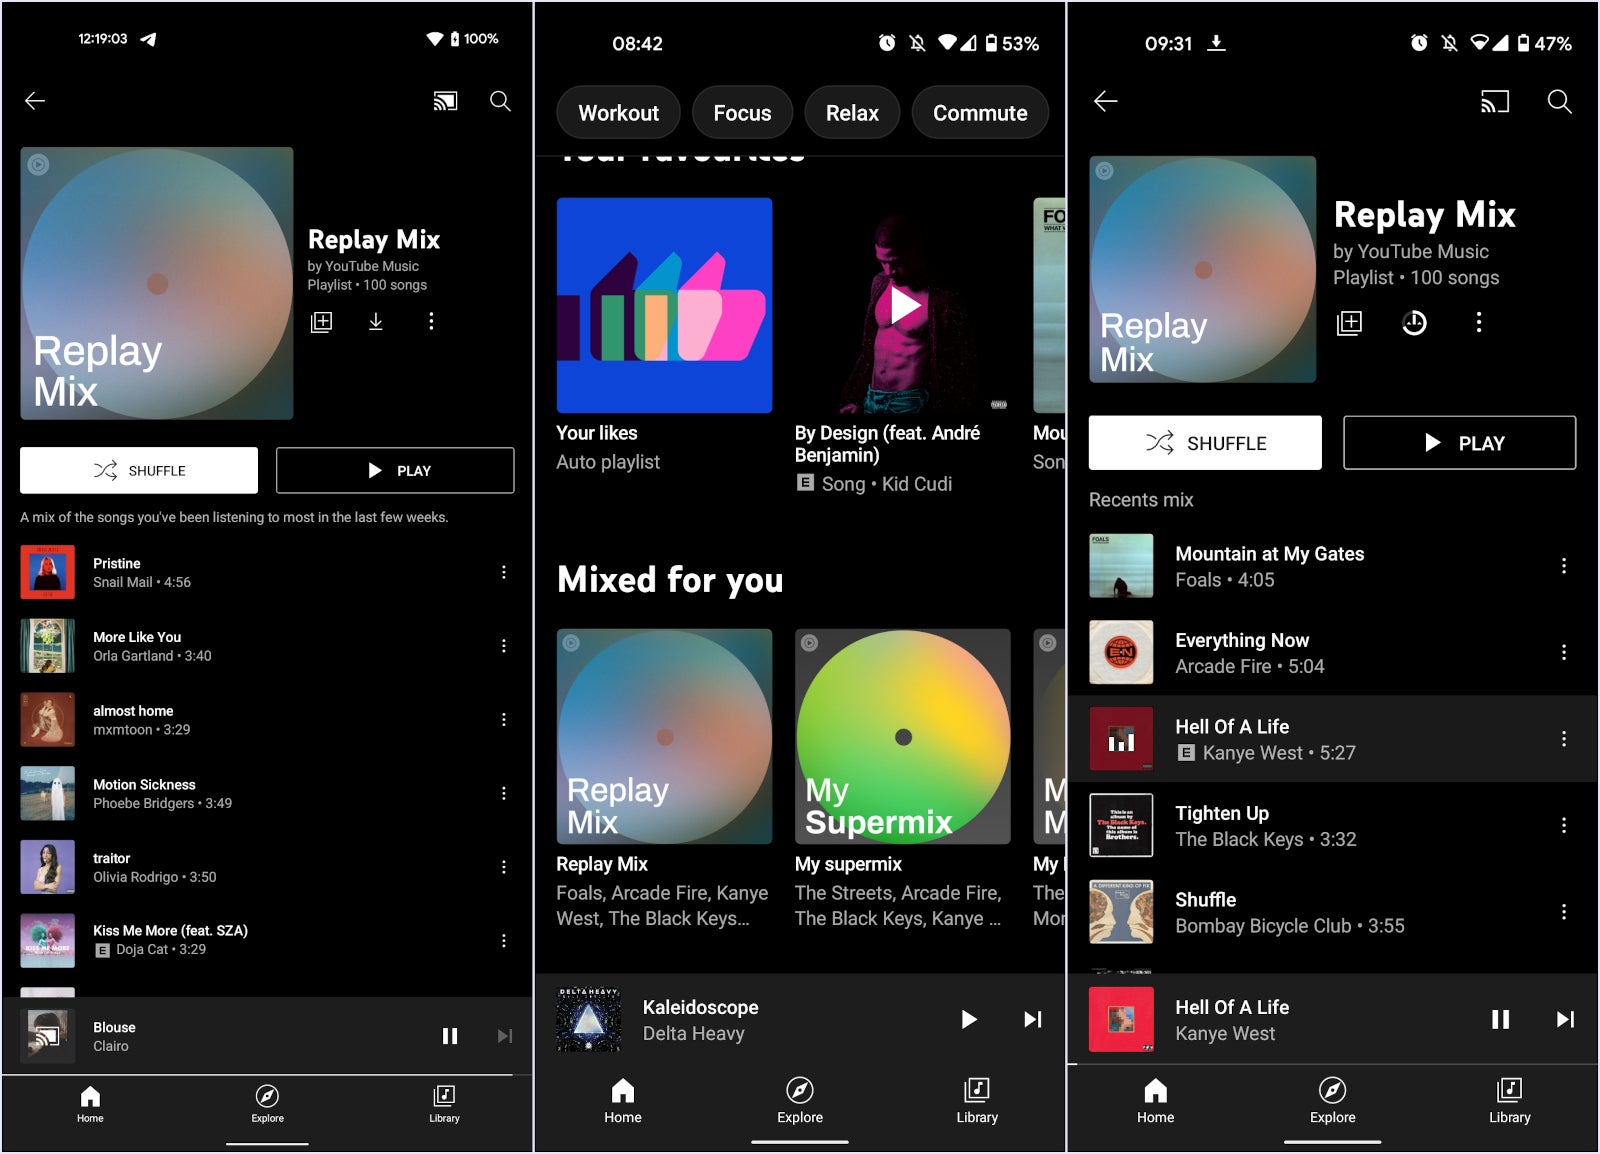 YouTube Music 'Replay Mix' playlist, similar to Spotify's 'On Repeat', is being rolled out to users